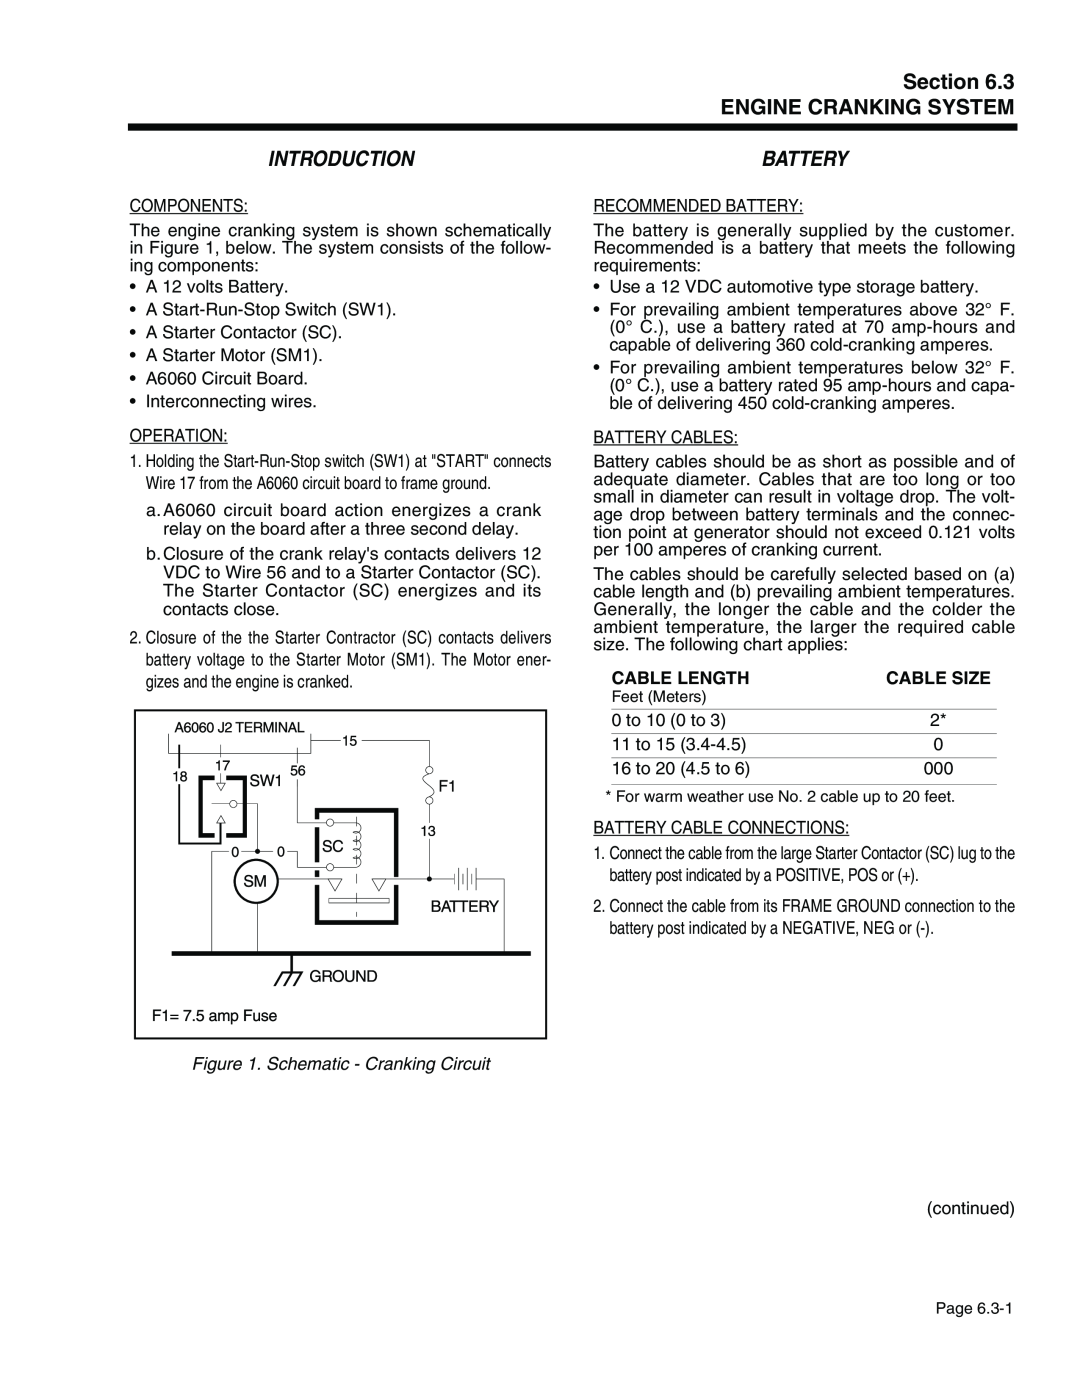 Generac Power Systems 941-2, 940-2 Section ENGINE CRANKING SYSTEM, Battery, Schematic - Cranking Circuit, Cable Length 